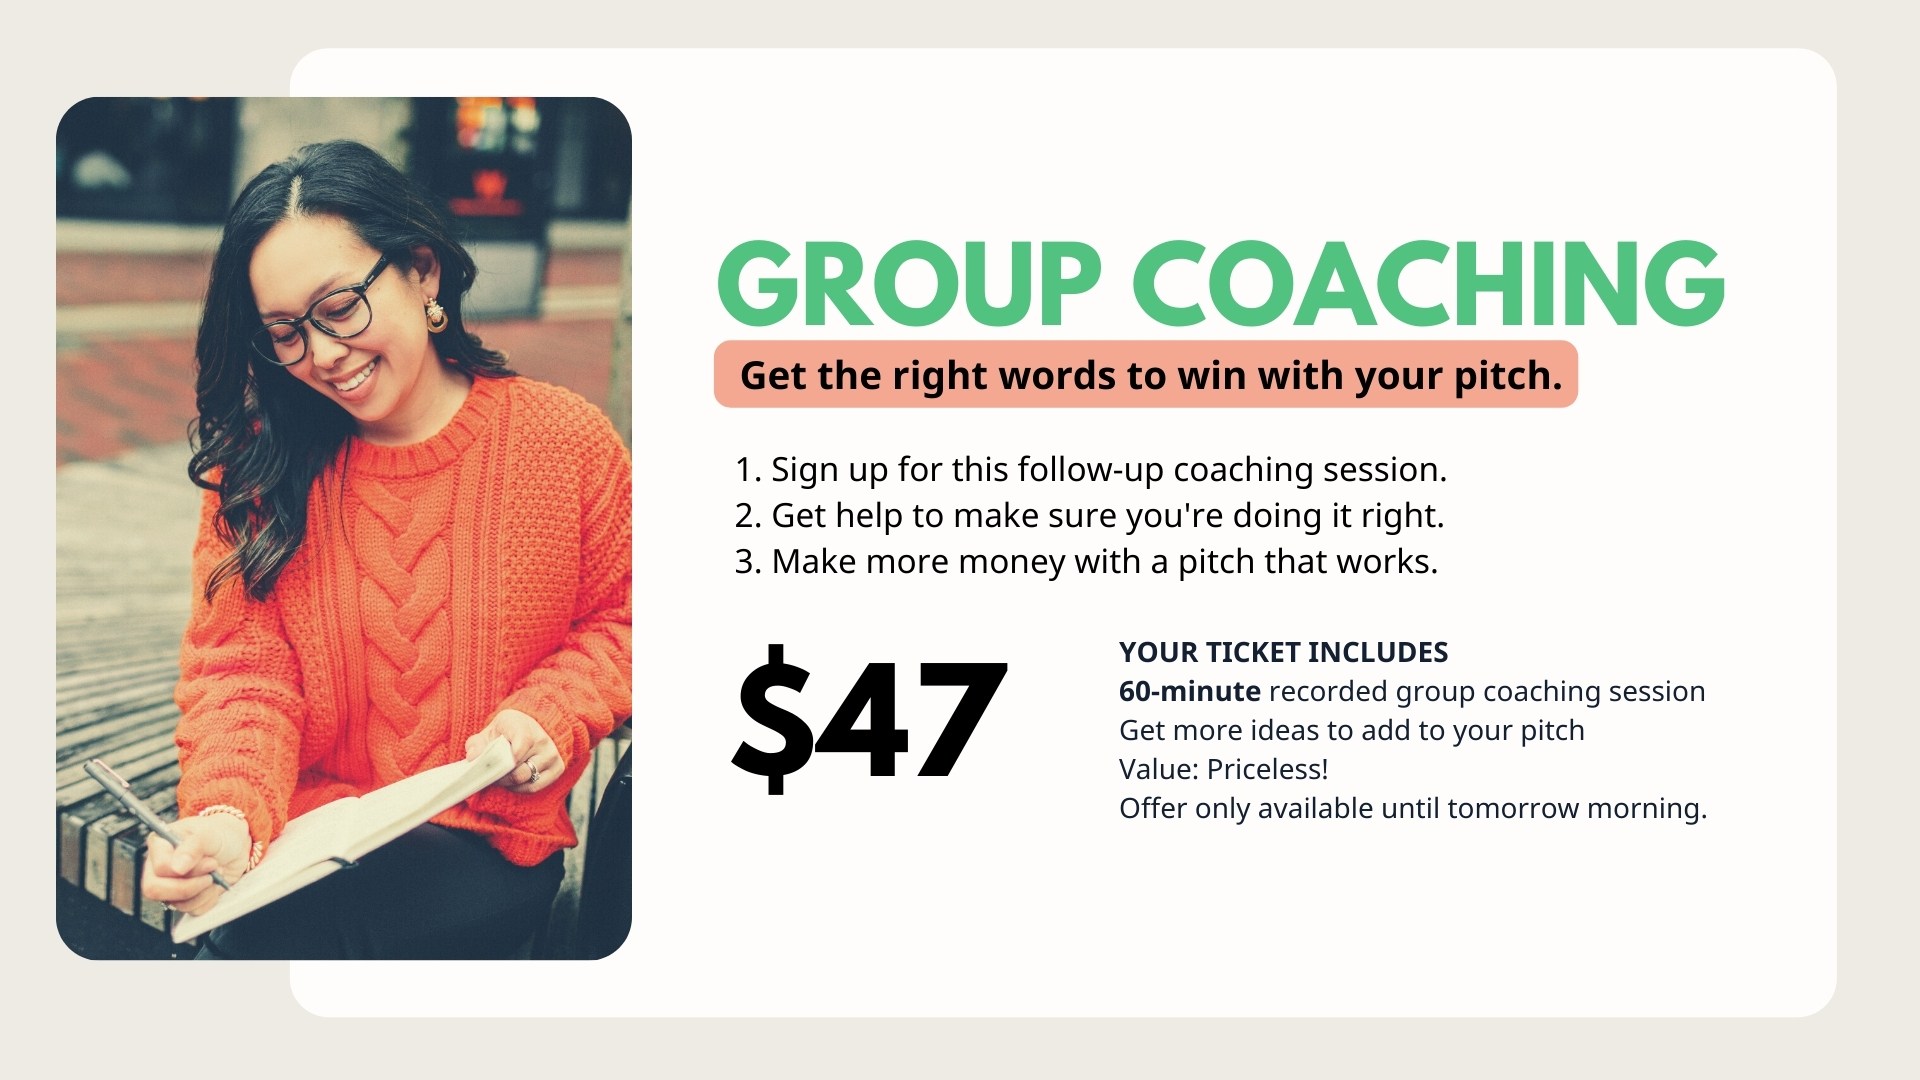 Group coaching offer